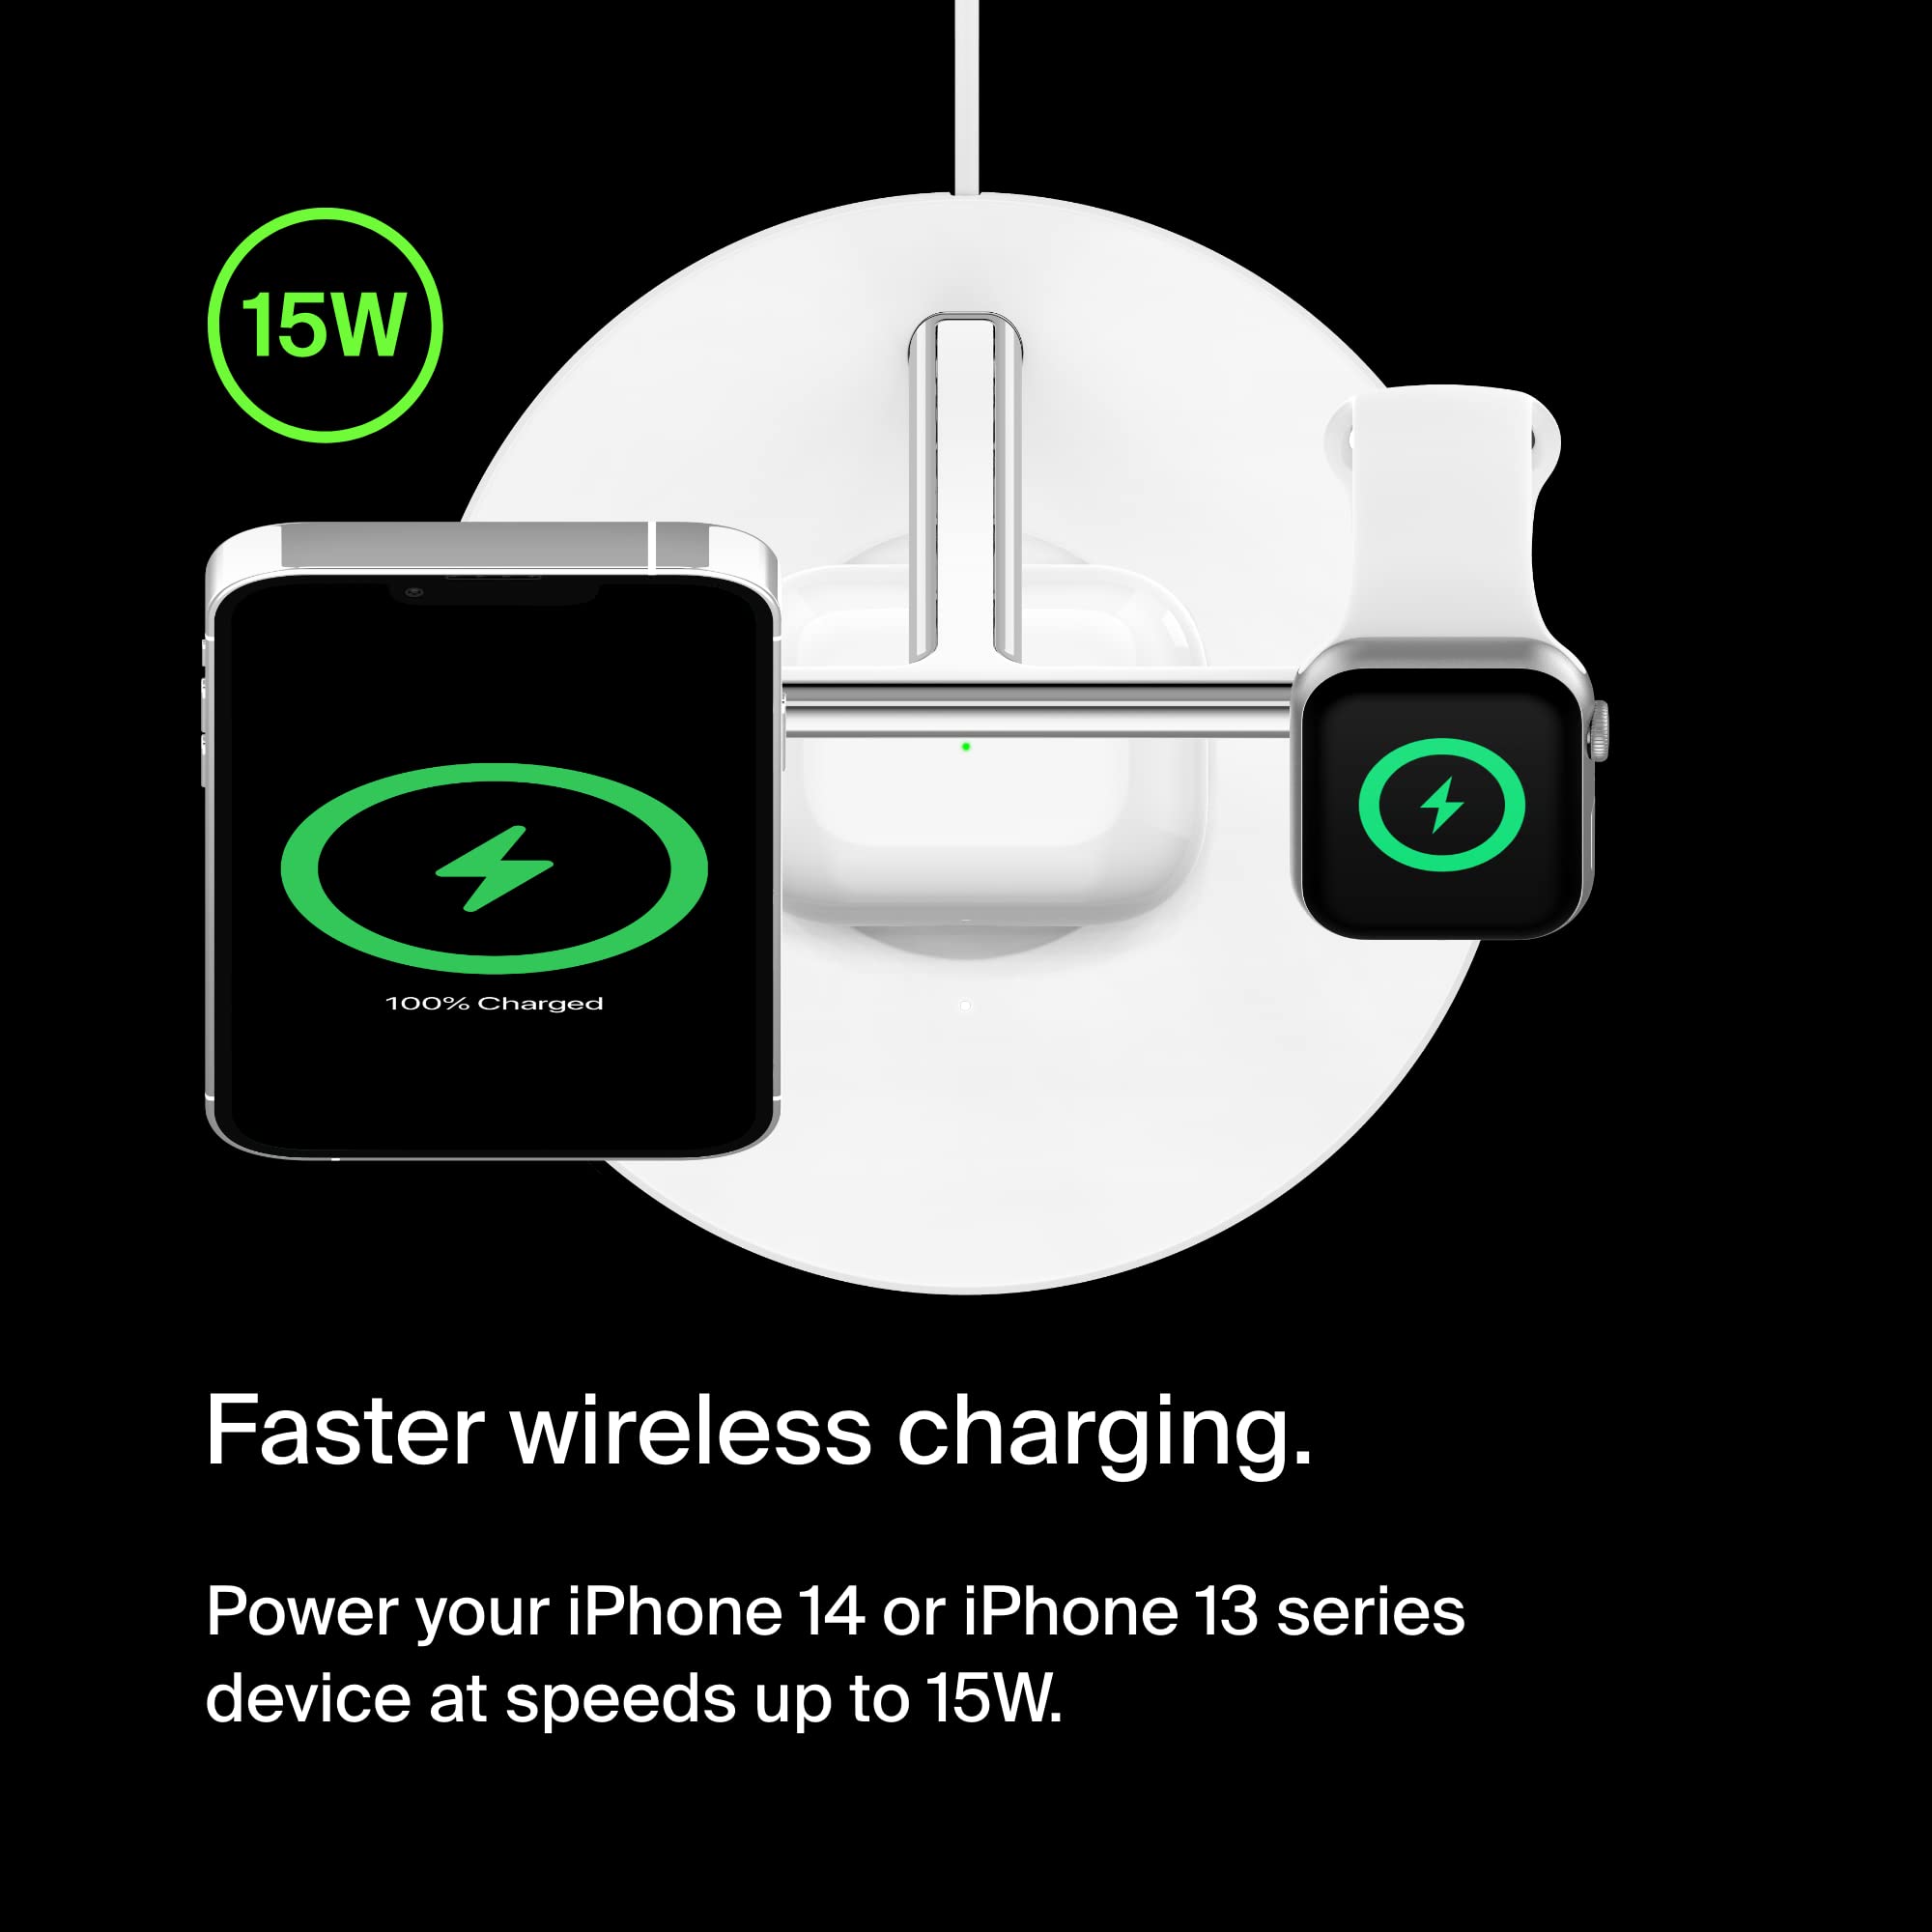 Belkin MagSafe 3-in-1 Wireless Charging Stand - 2ND GEN w/ 33% Faster Wireless Charging for Apple Watch - iPhone 14, 13 & 12 series & AirPods - MagSafe Charging Station For Multiple Devices - White